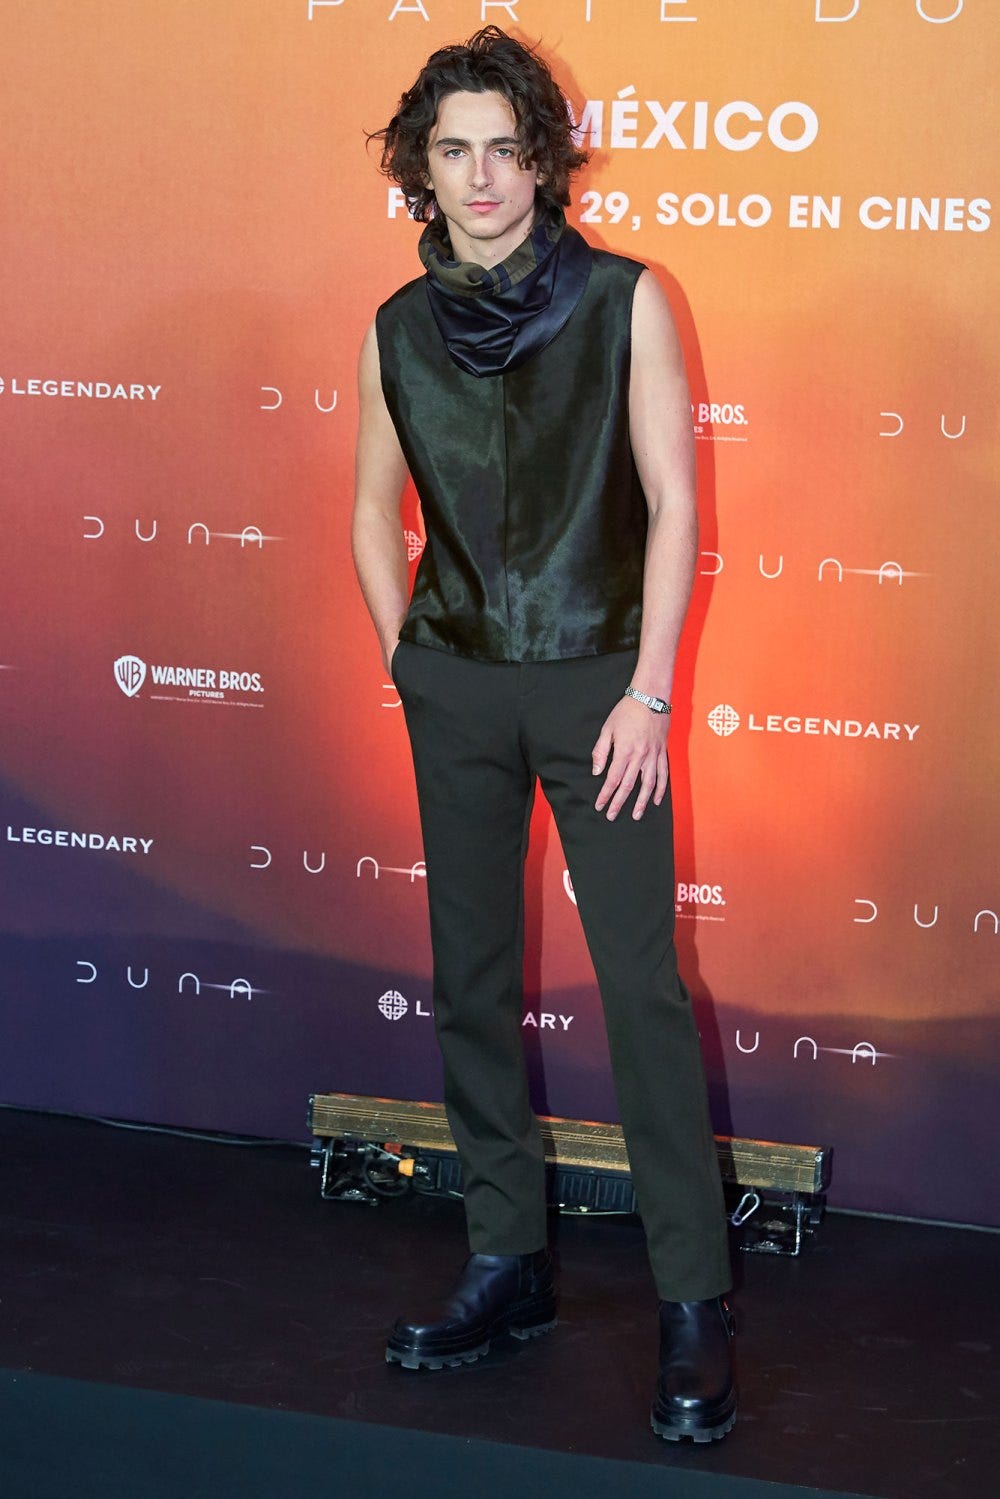 Timothee Chalamet Rocks Silky Tank Top While Promoting 'Dune' in Mexico |  Us Weekly